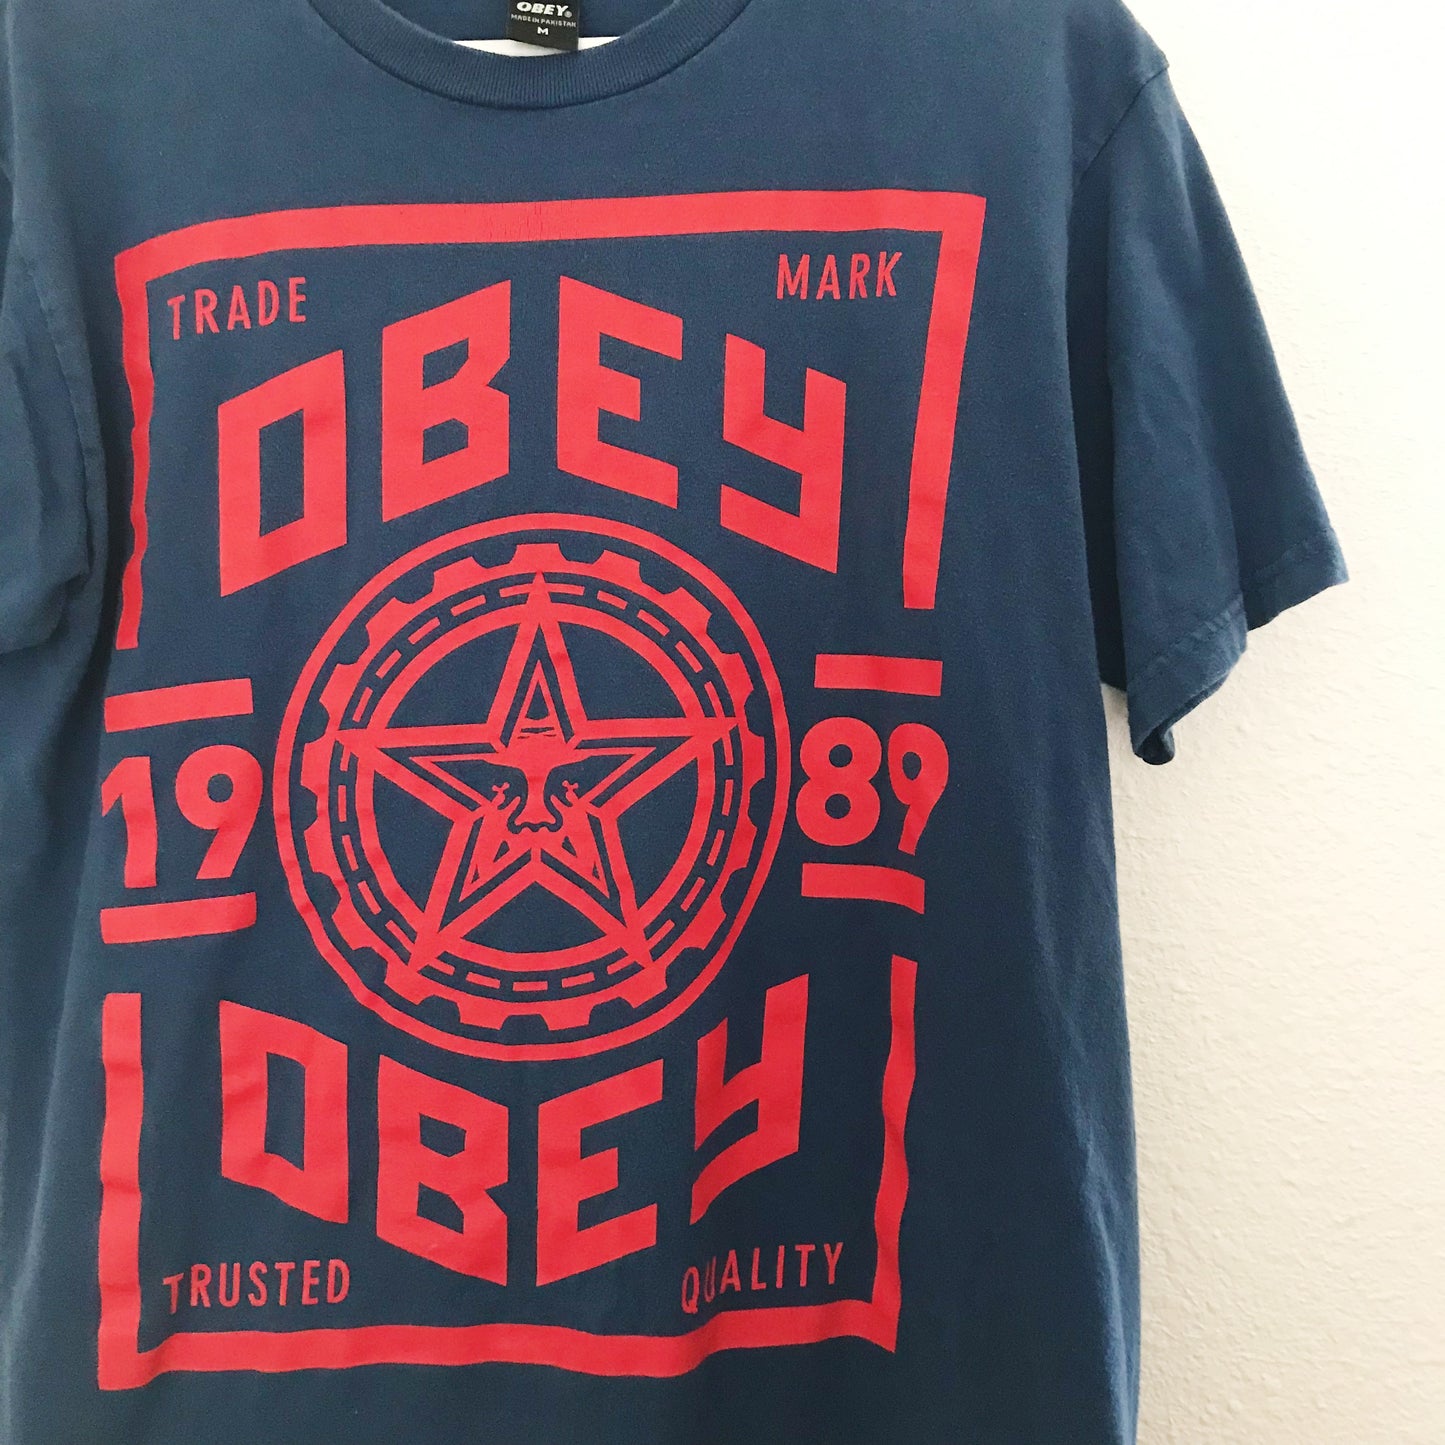 Obey Navy Blue Red Graphic Cotton Tee T Shirt